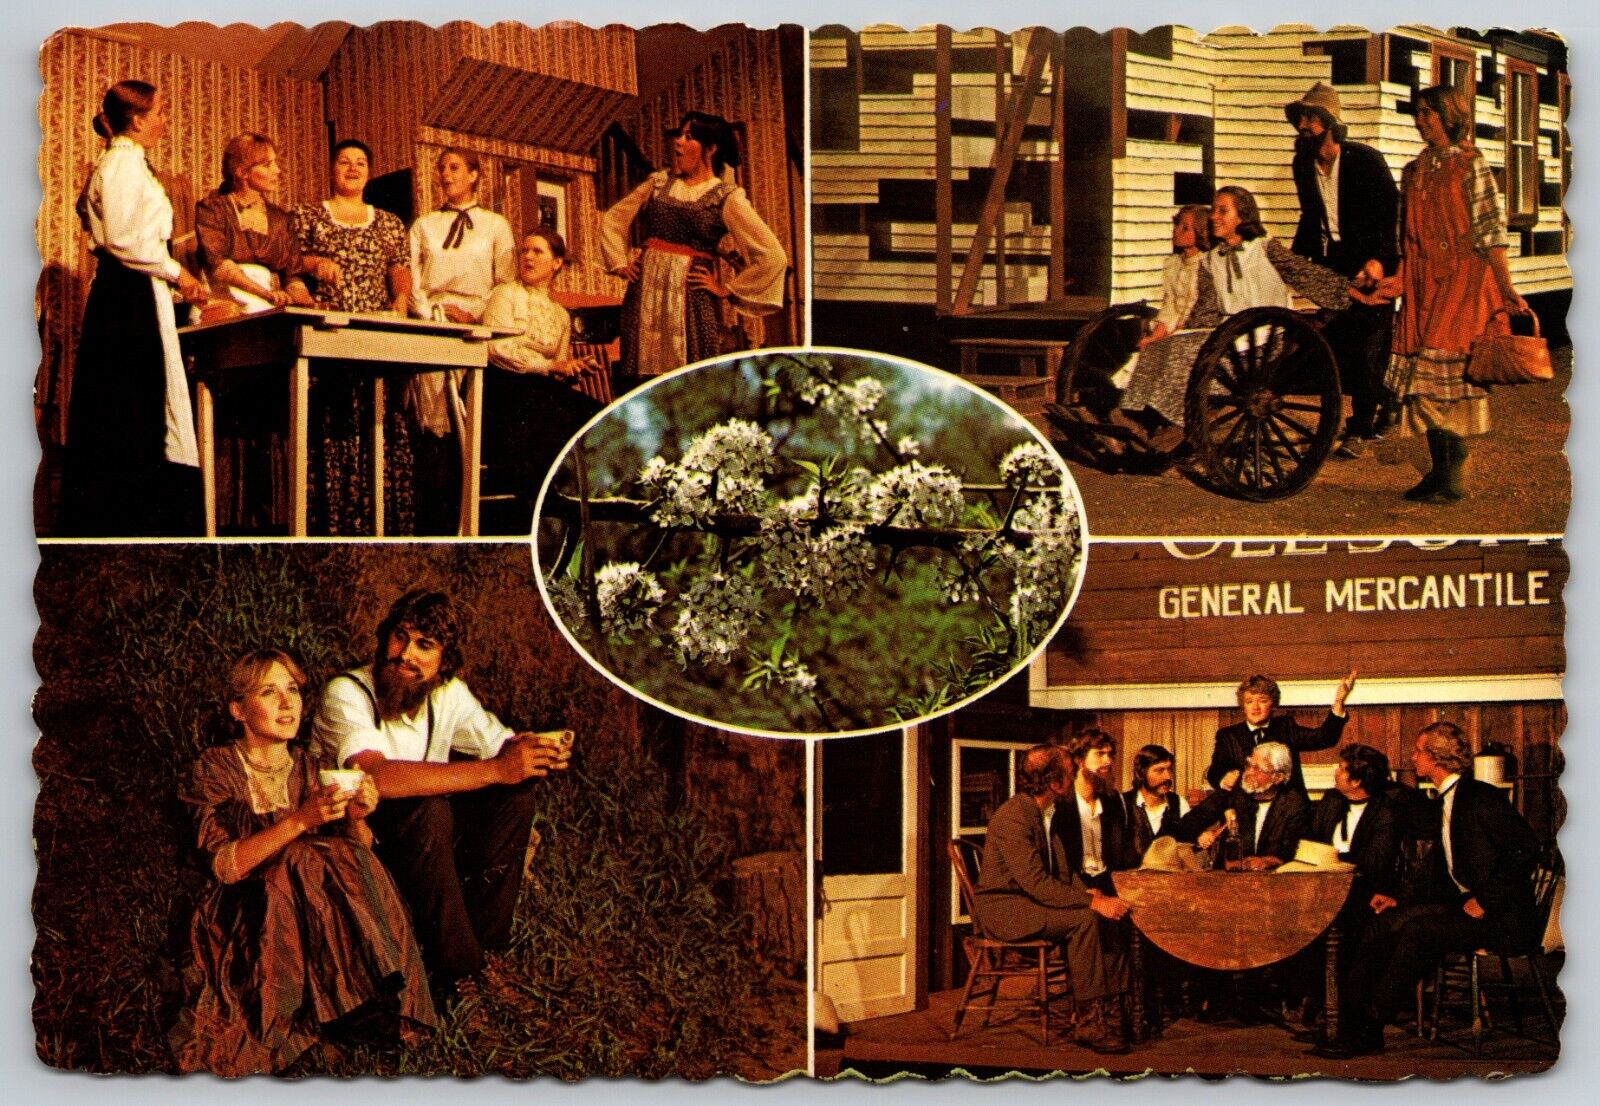 Laura Ingalls Wilder Pageant - Fragments of a Dream - MN (6 X 4 in) Postcard